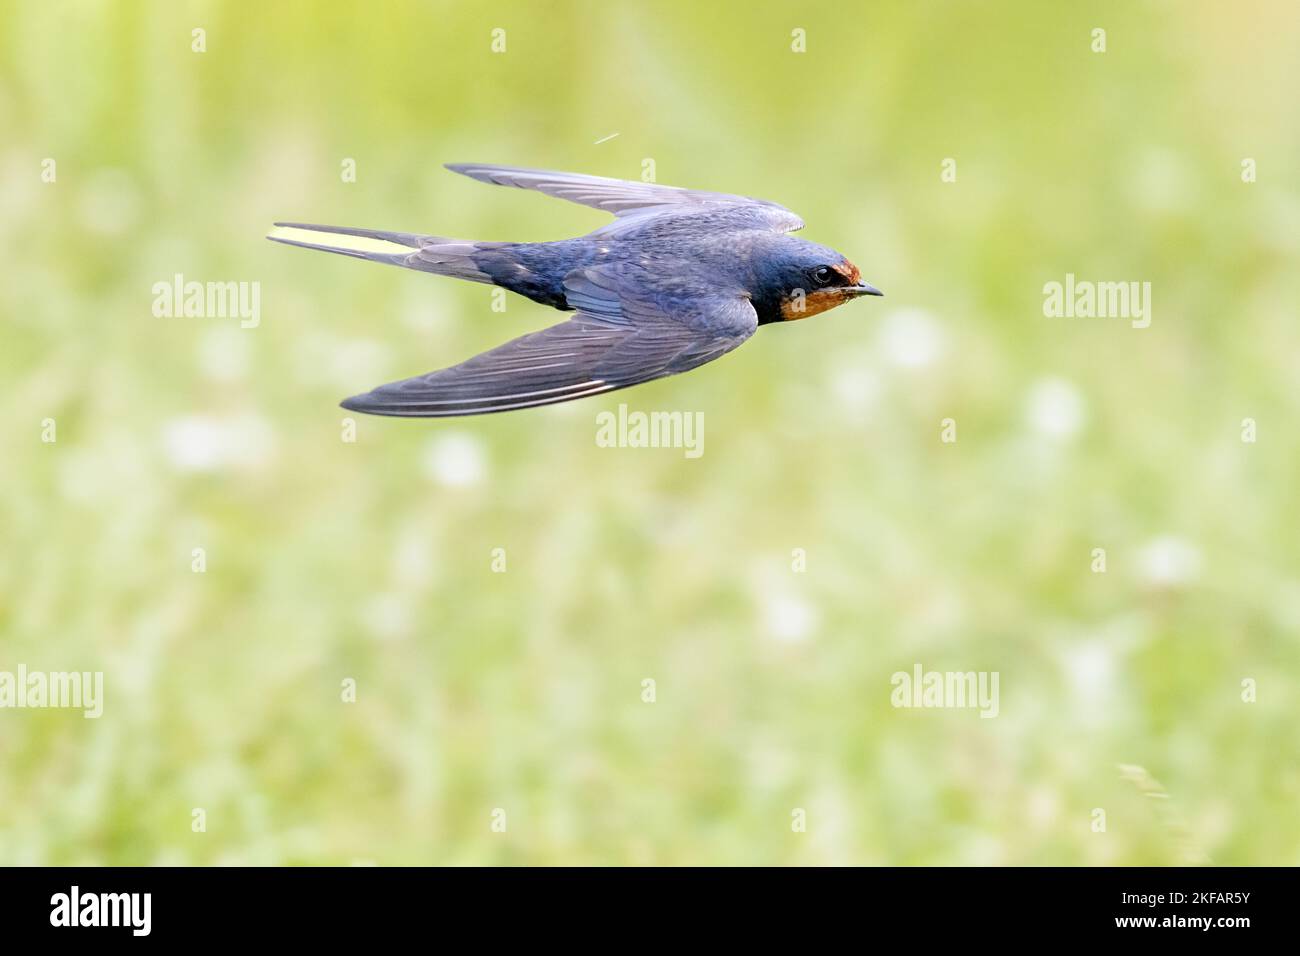 Barn swallow over grass Stock Photo